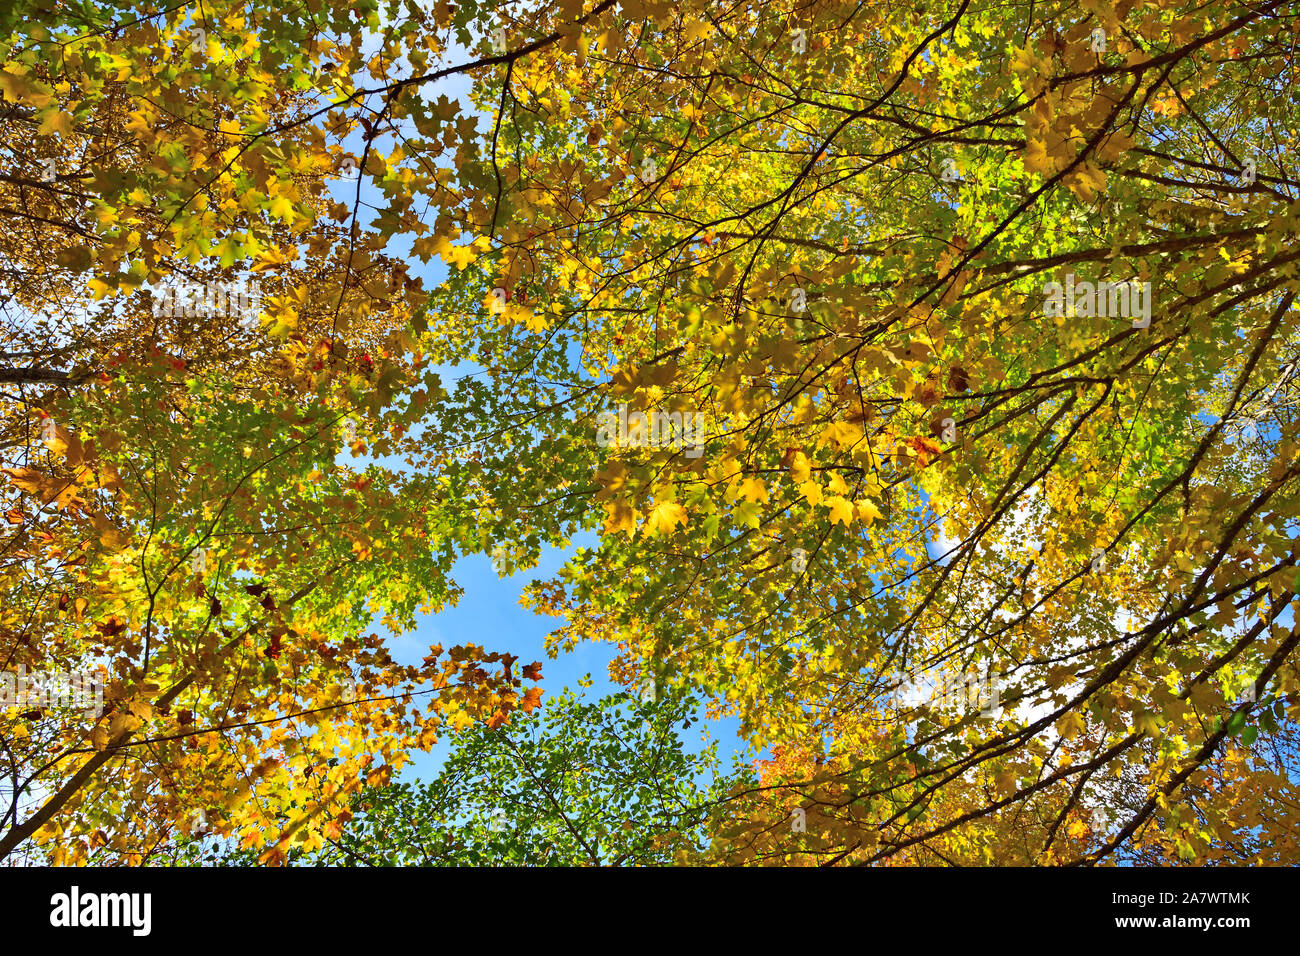 Looking up at the tree tops with the light coming through the branches highlighting the changing leaves. Stock Photo